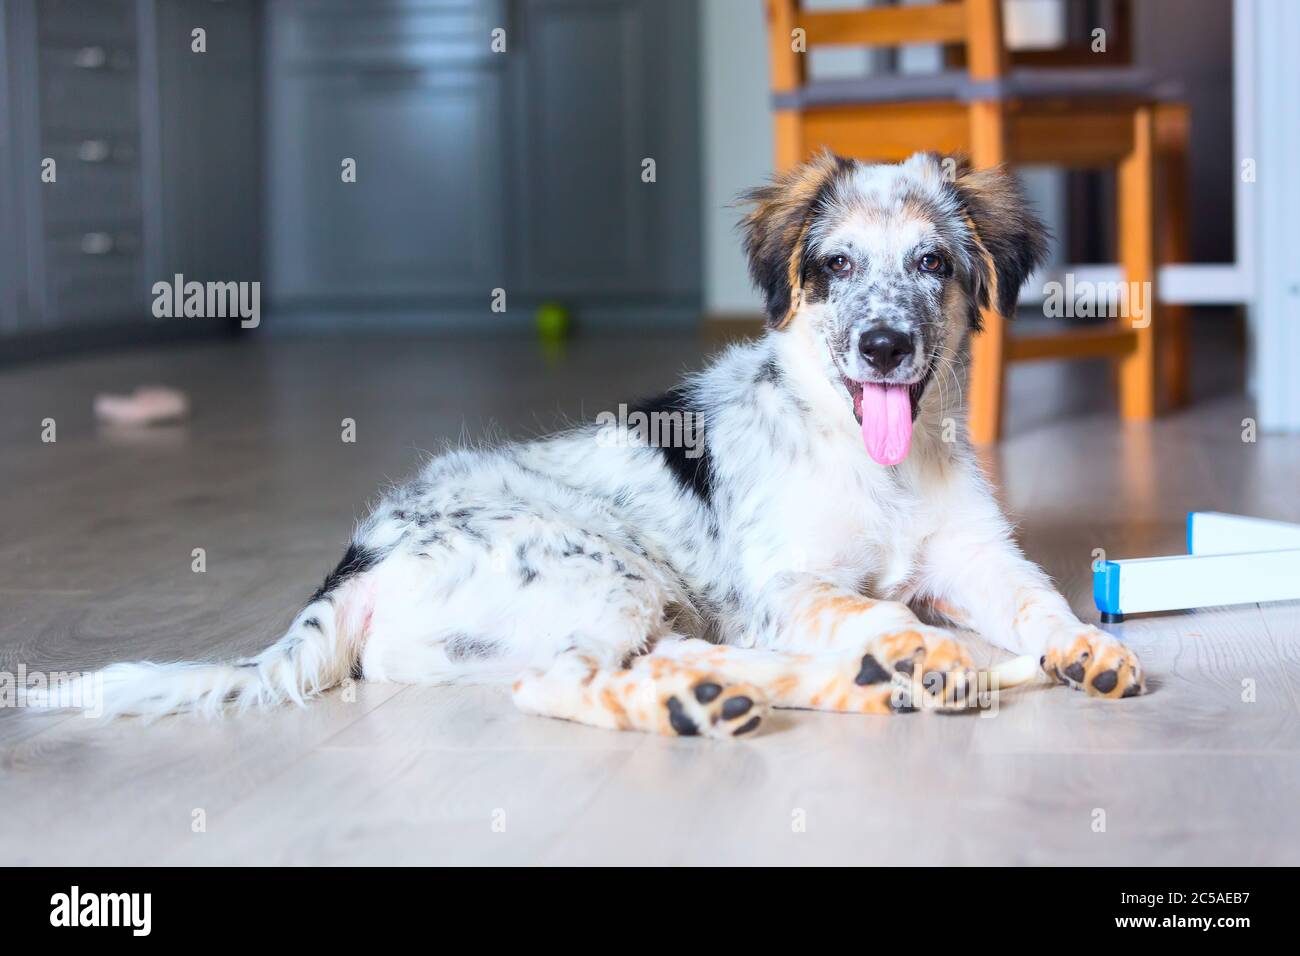 fuzzy funny happy cute dog sticking out tongue at home on the floor Stock Photo